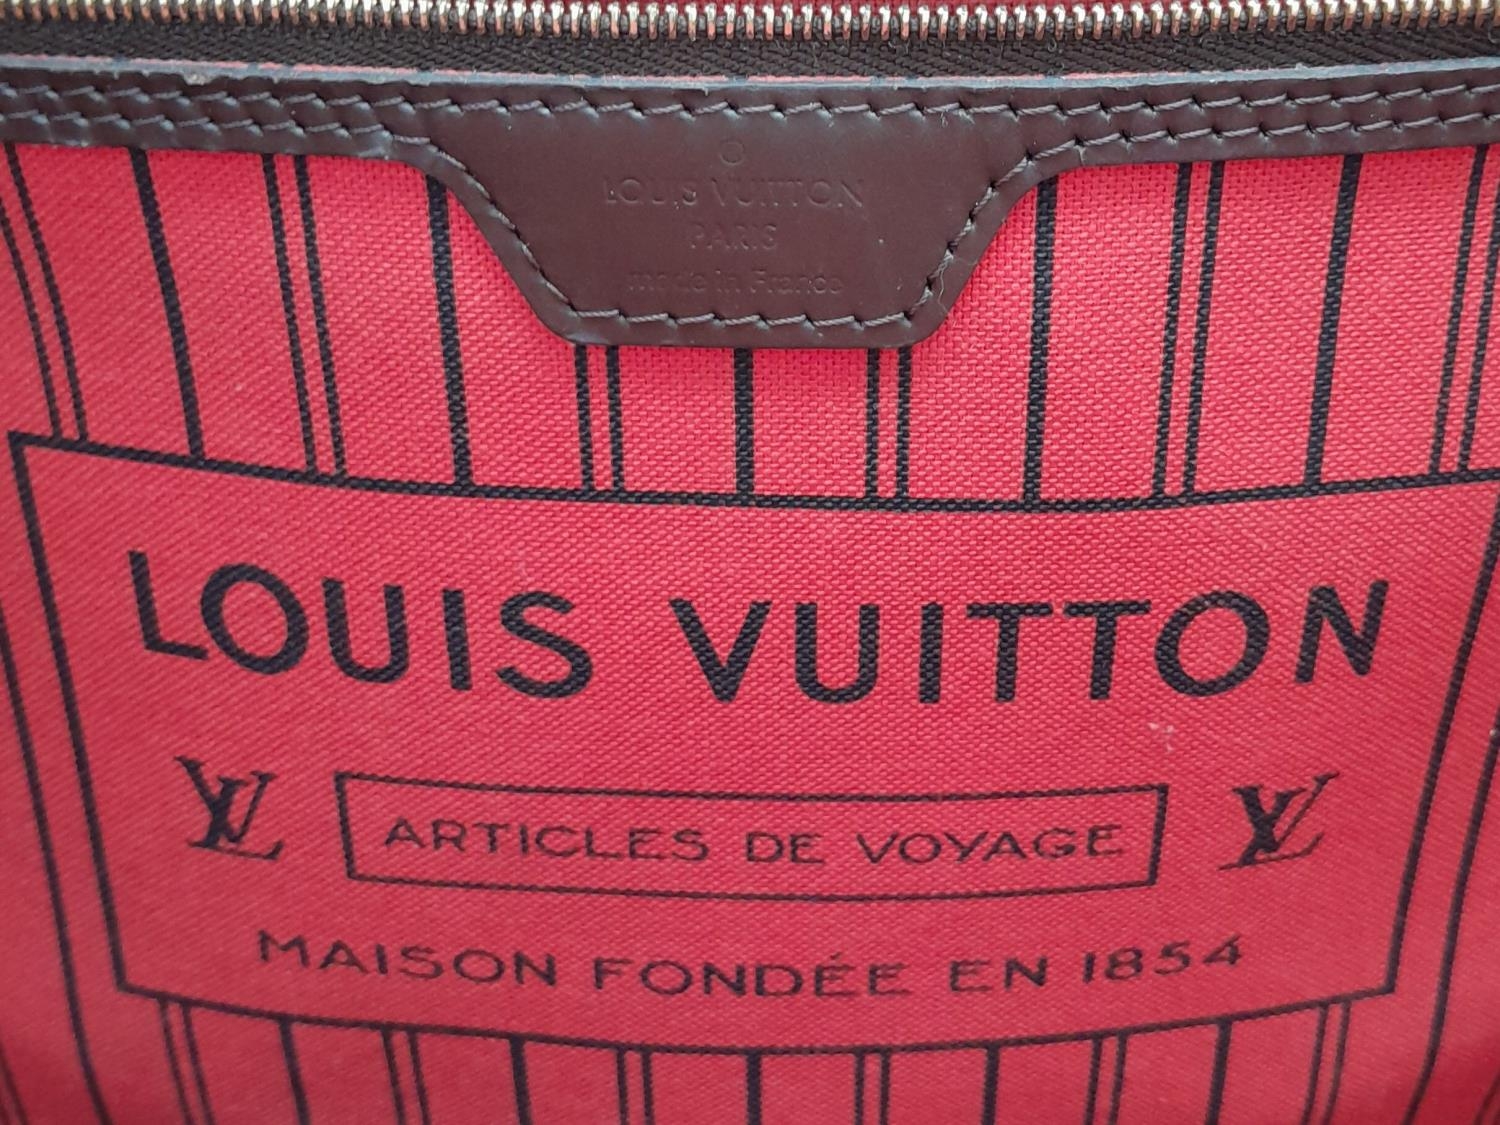 A Louis Vuitton Neverfull Damier Ebene Bag. Coated canvas exterior with leather trim, gold-toned - Image 11 of 12